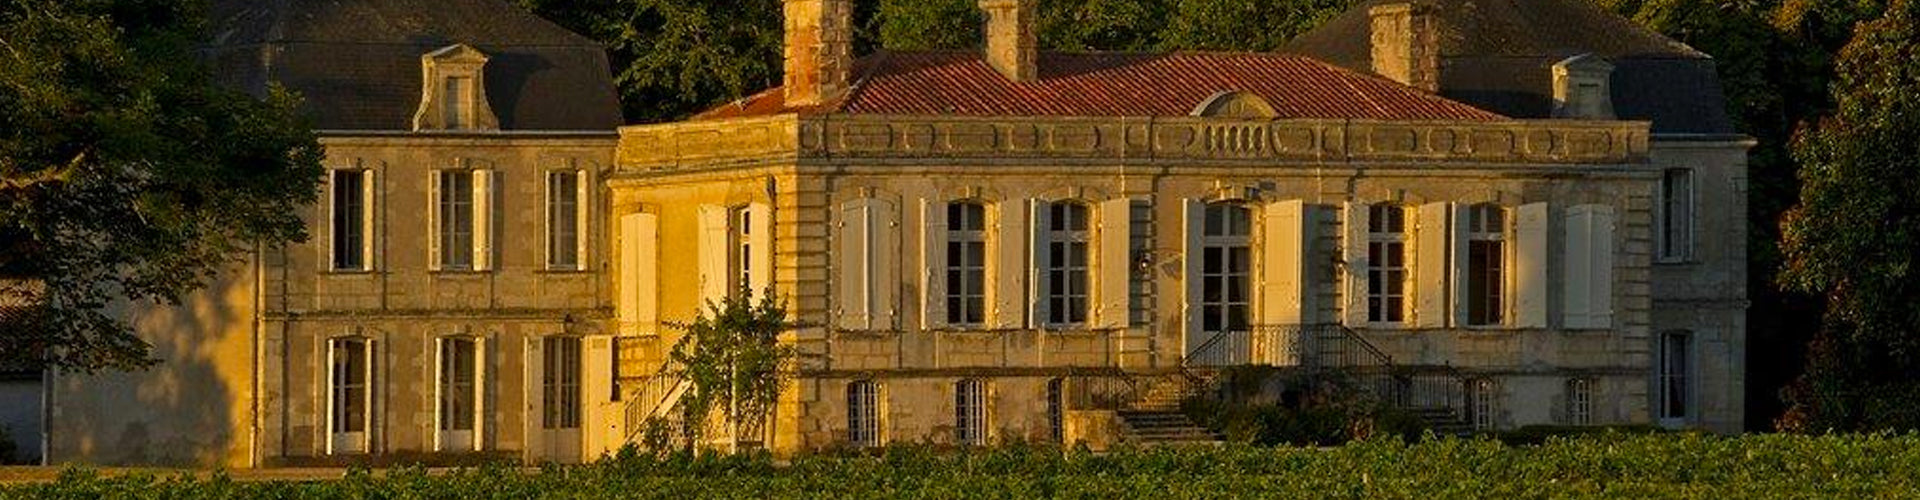 Château Picque Caillou in the Vineyards of Pessac-Léognan, Bordeaux in France